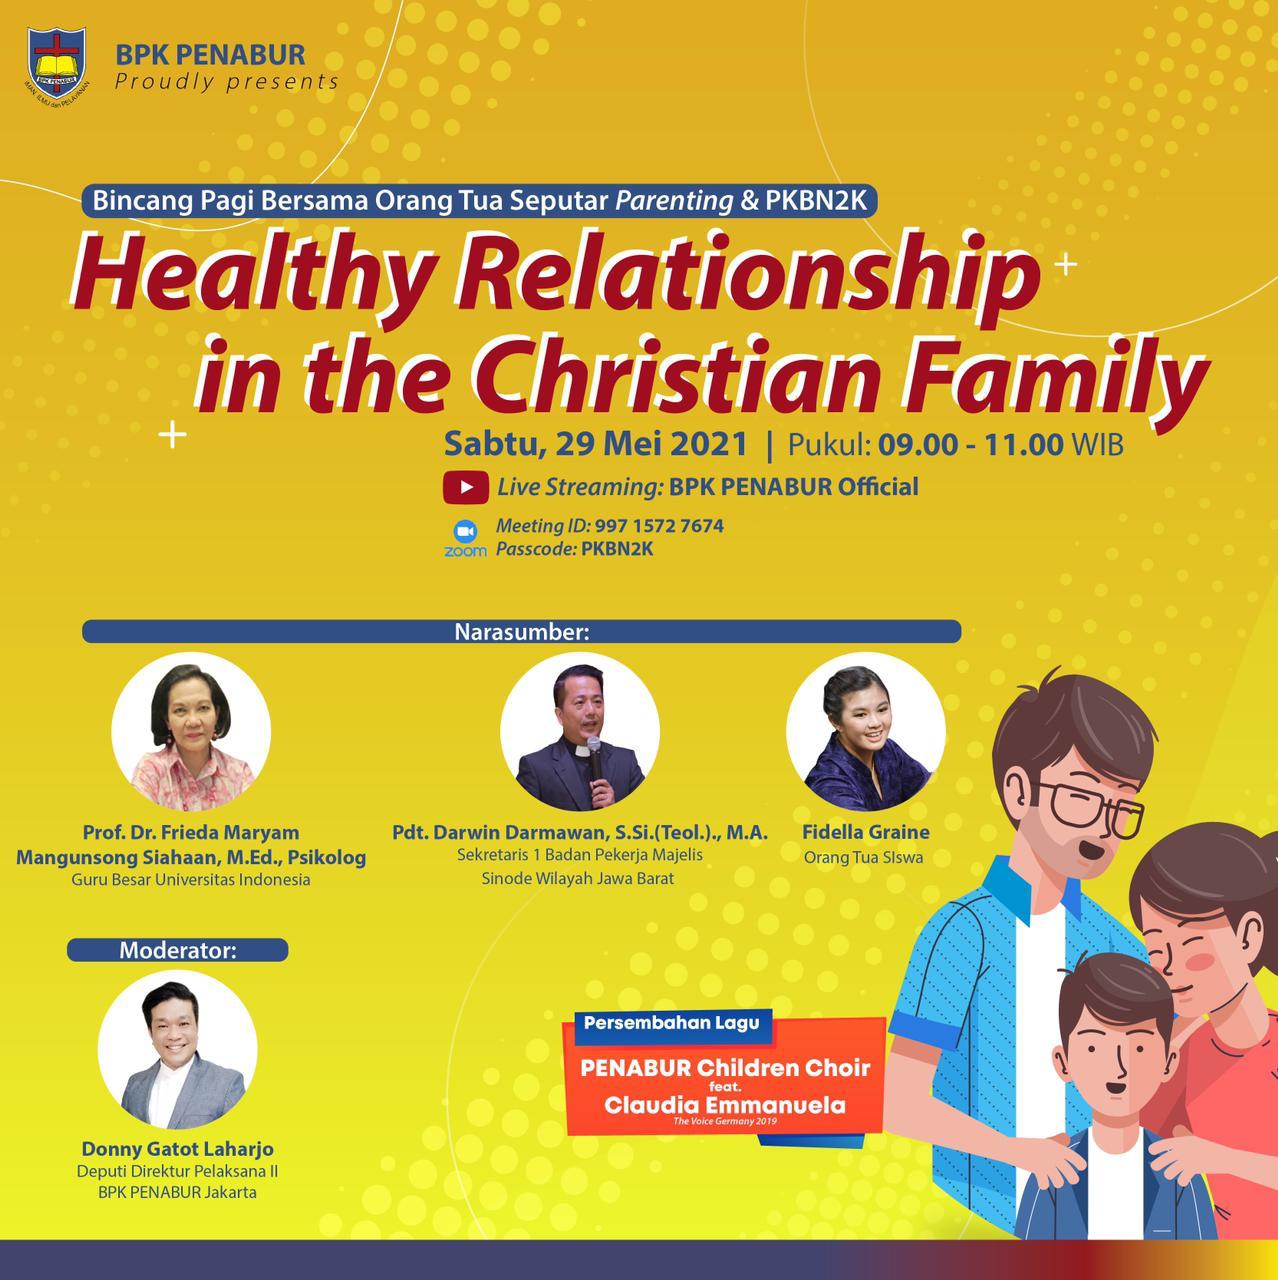 Healthy Relationship in the Christian Family